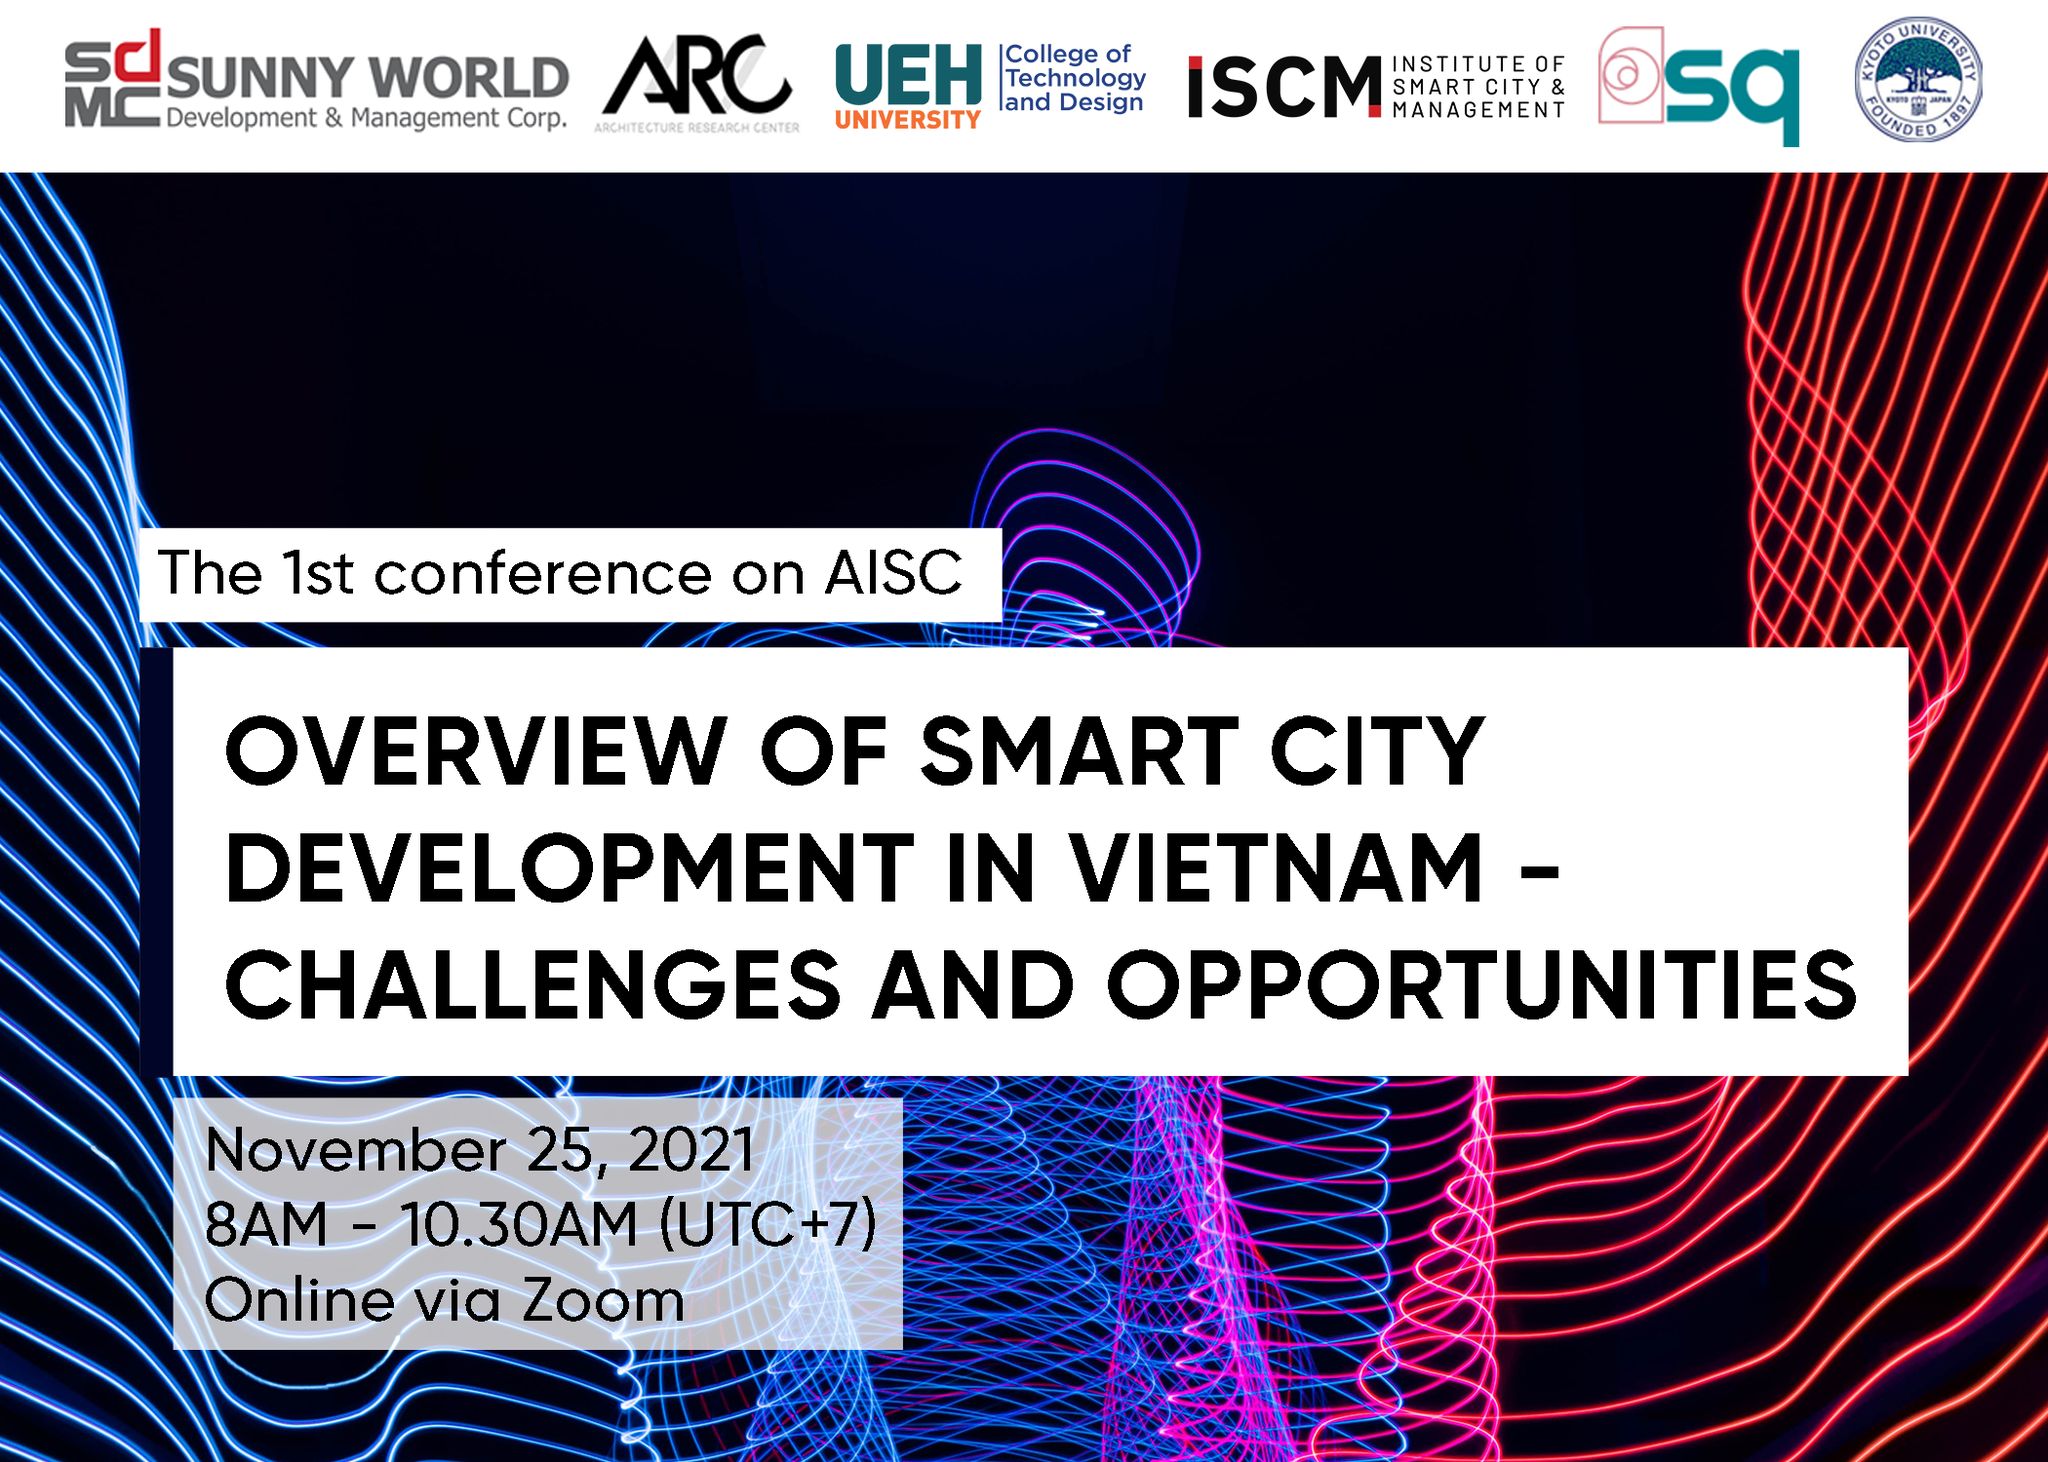 Online conference - Overview of Smart City Development in Vietnam - Challenges and Opportunities